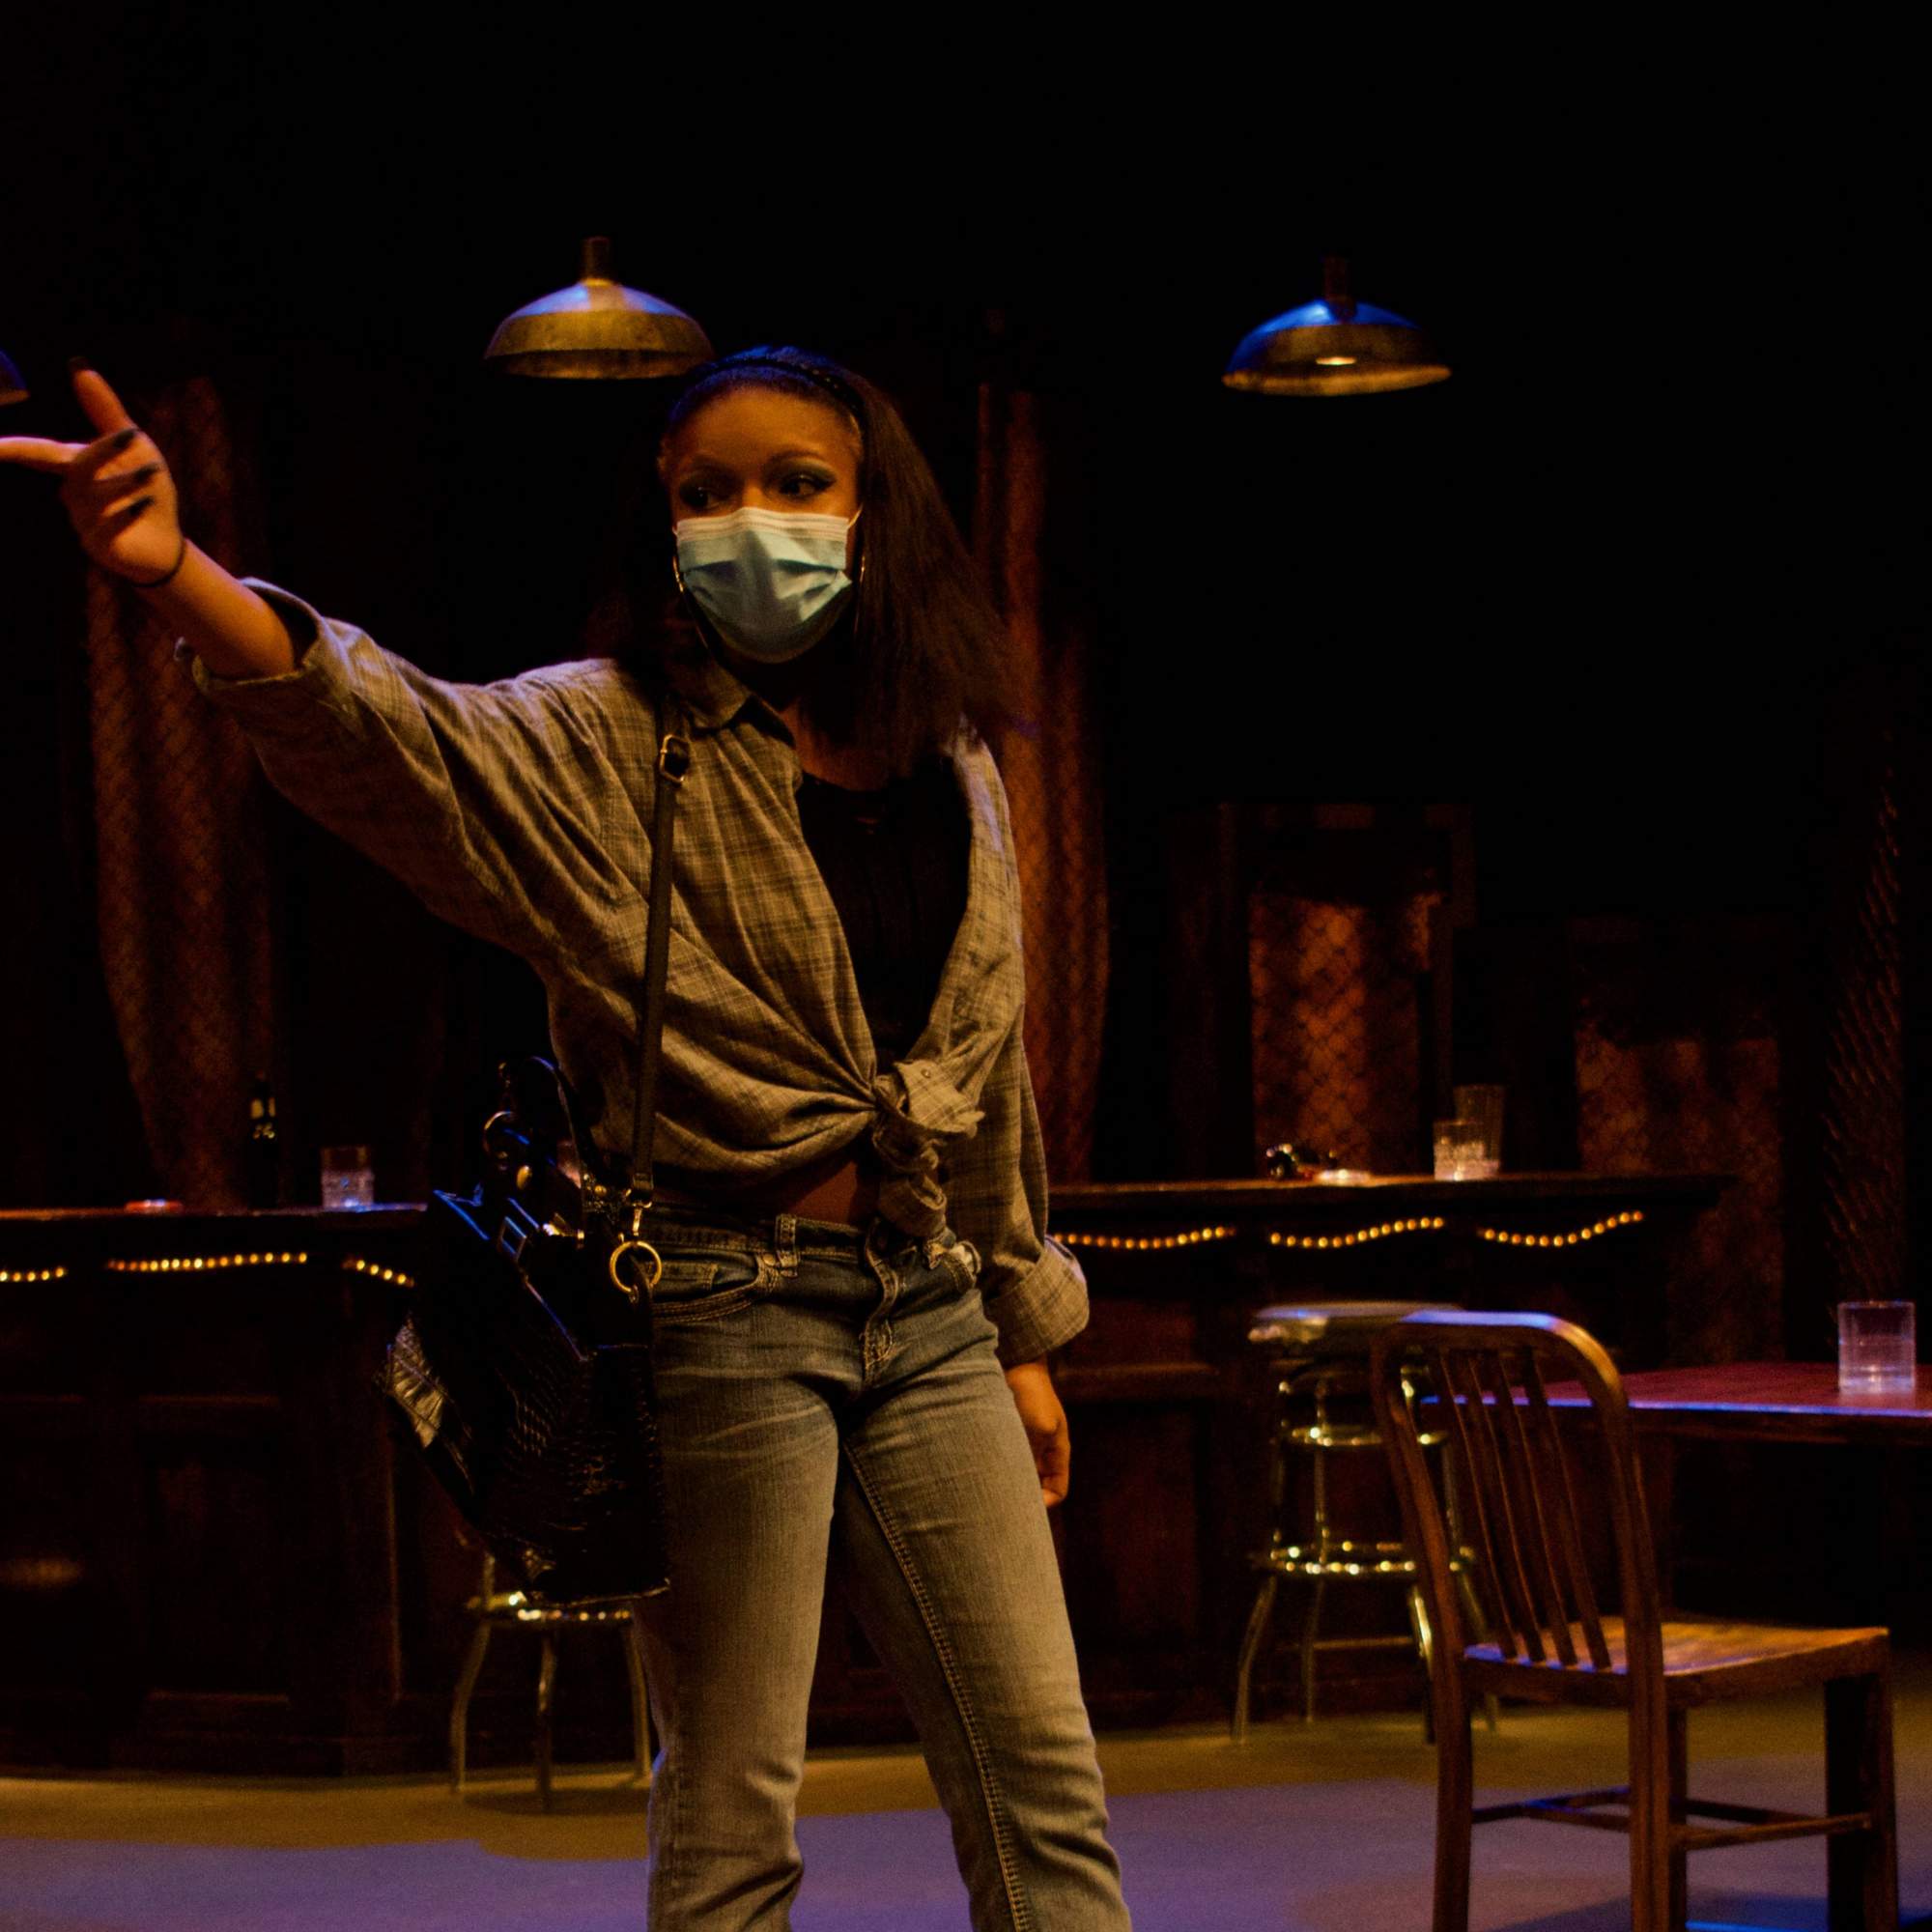 A woman in a tied up plaid shirt, jeans, and boots stands in the bar while pointing to something out of frame. 